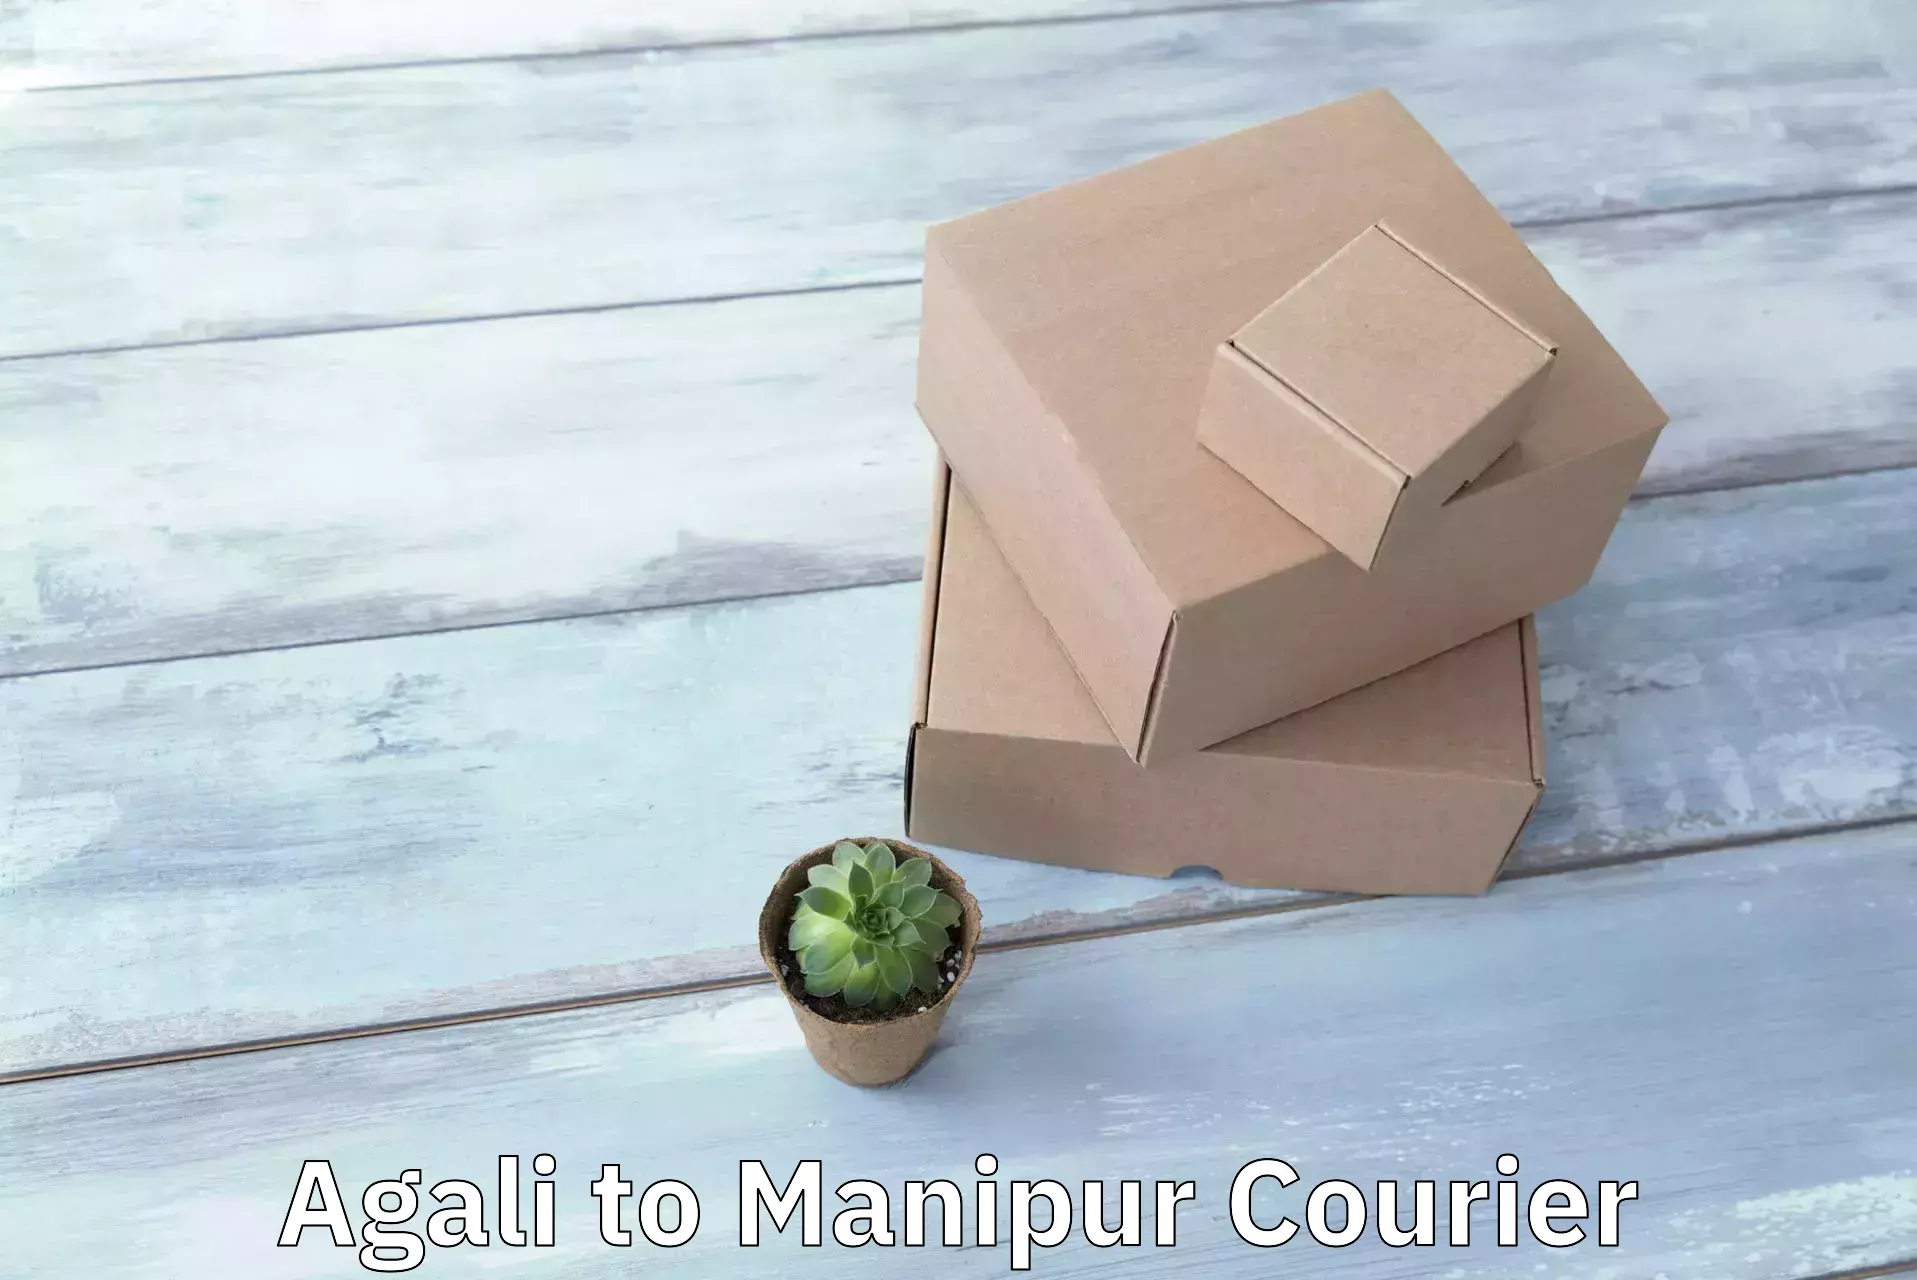 Global shipping networks Agali to Manipur